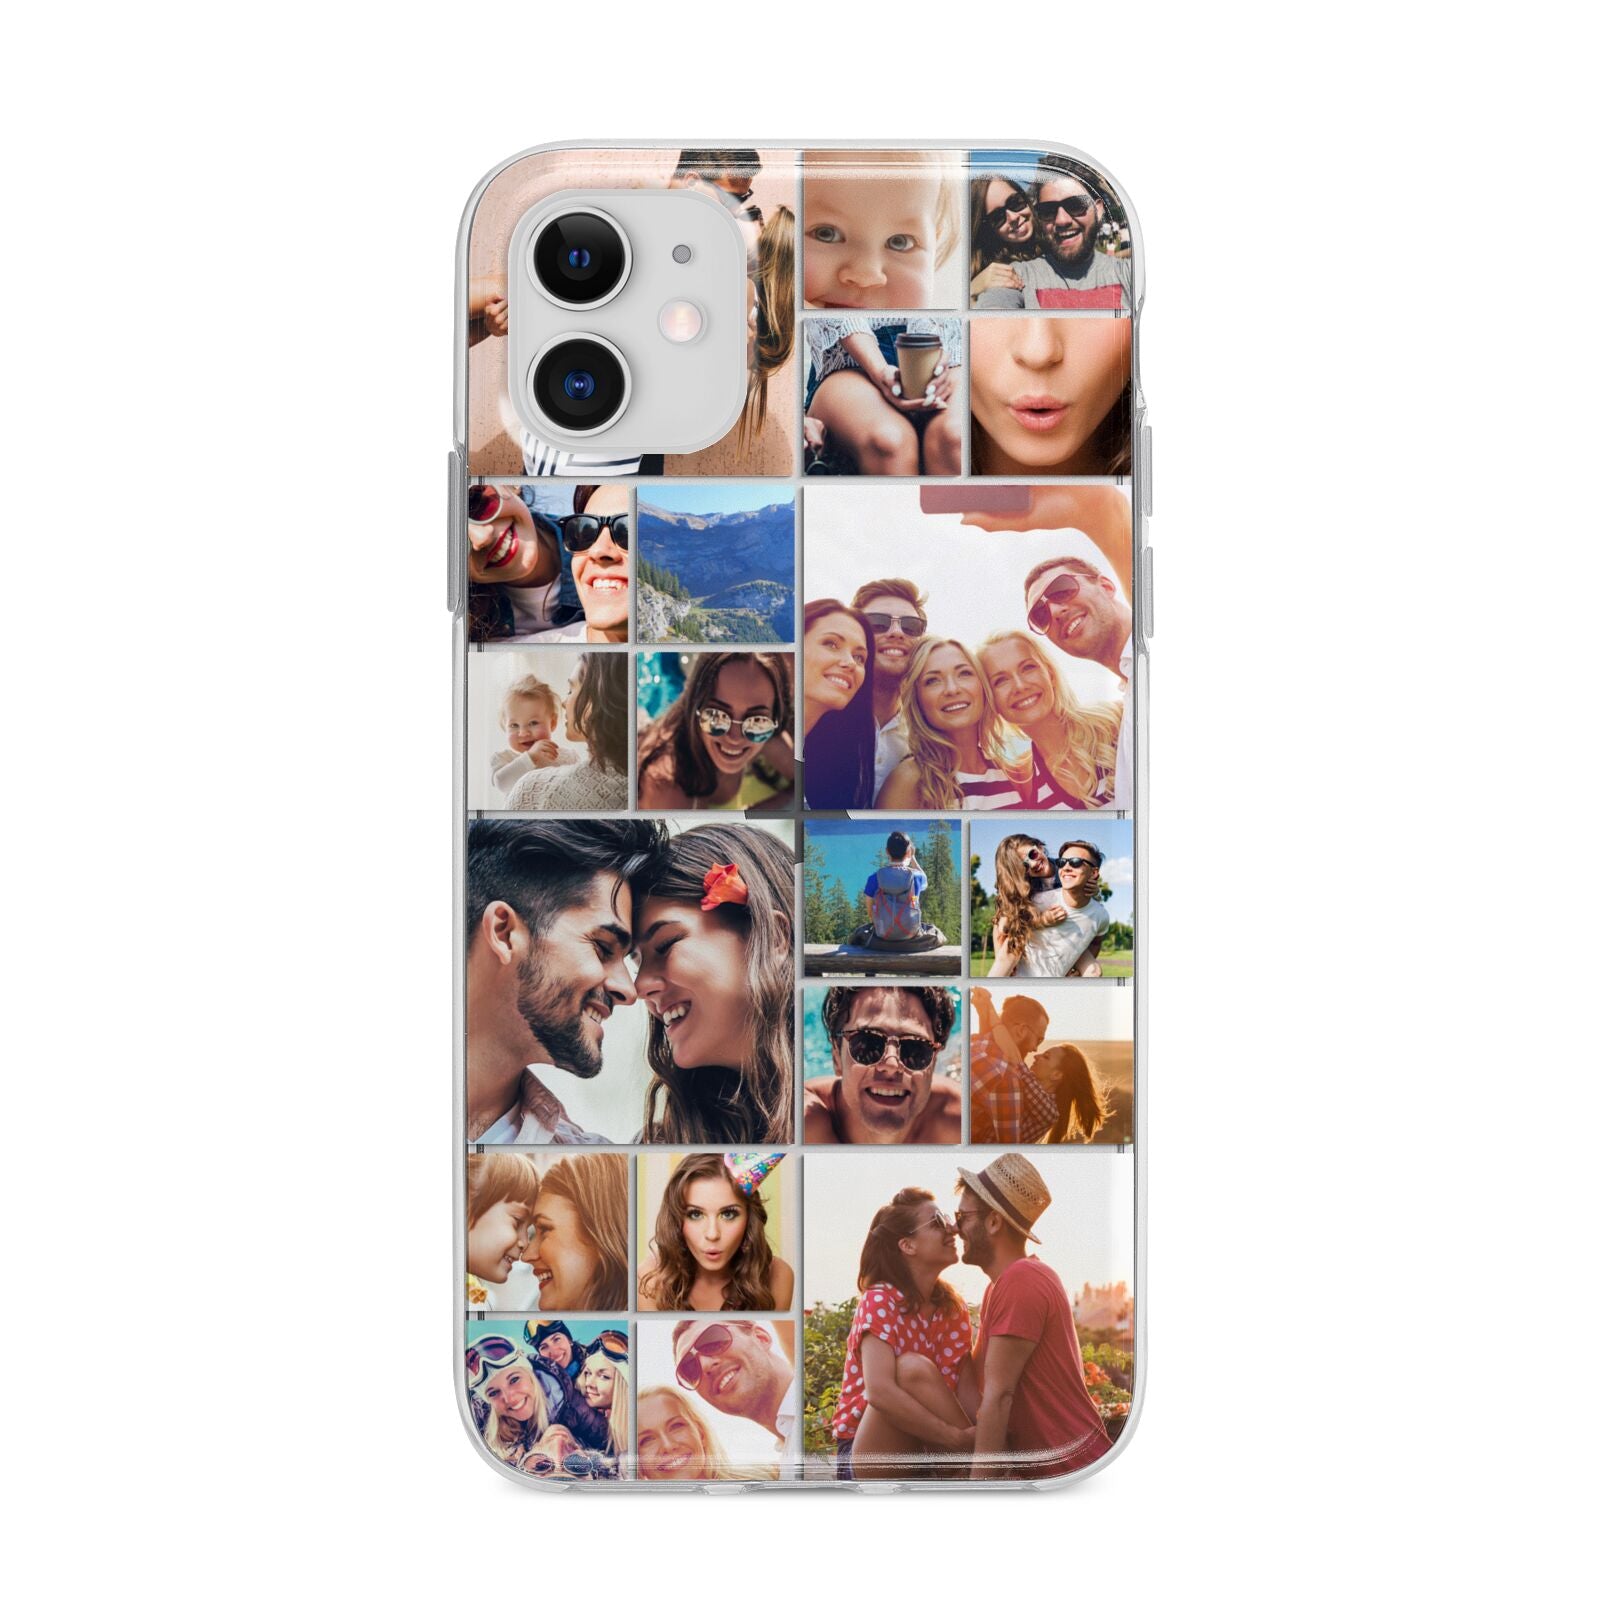 Photo Grid Apple iPhone 11 in White with Bumper Case